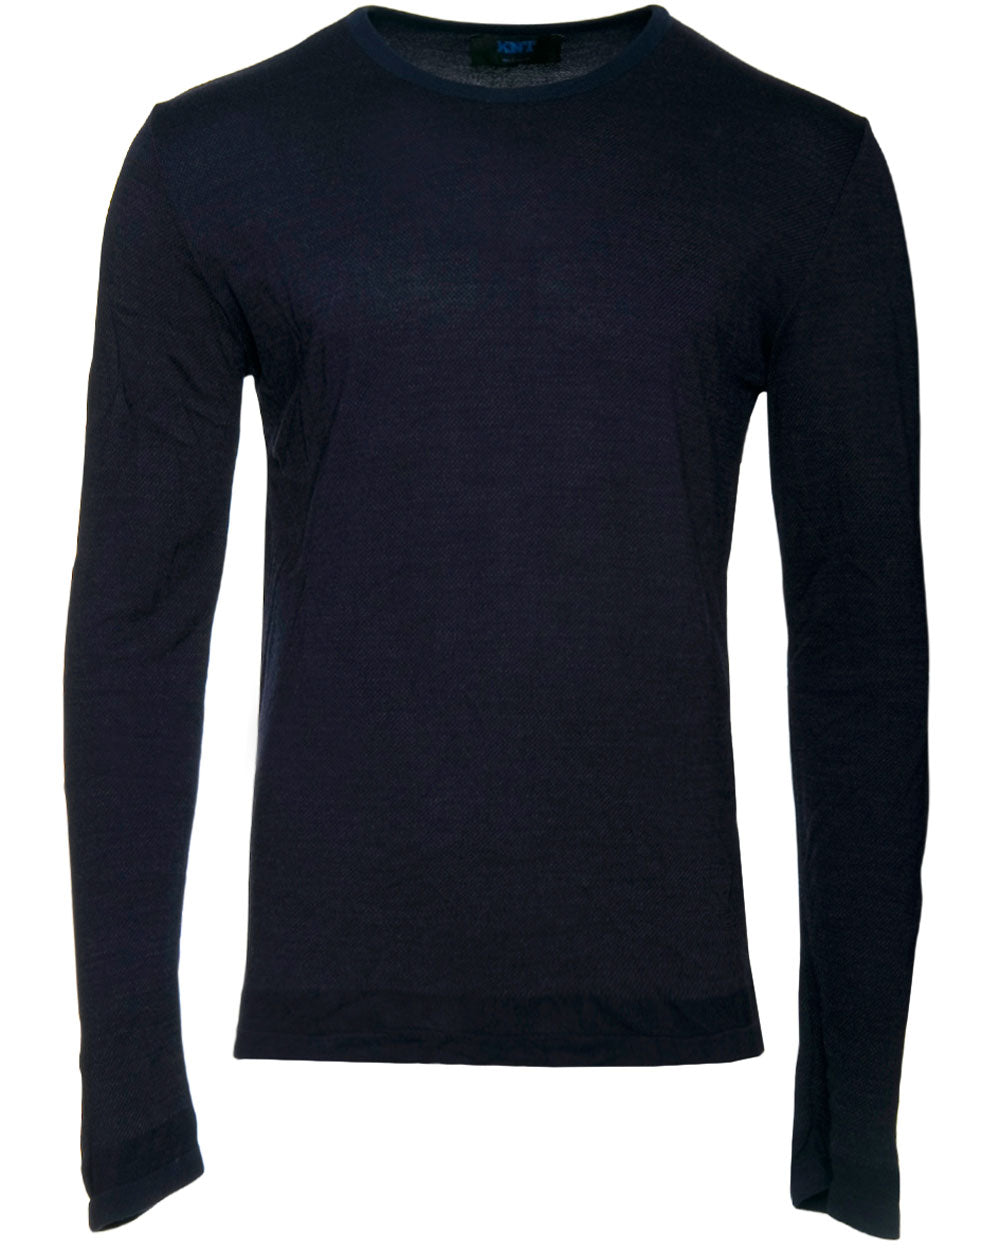 Knitted Jersey Long Sleeve T-Shirt in Navy